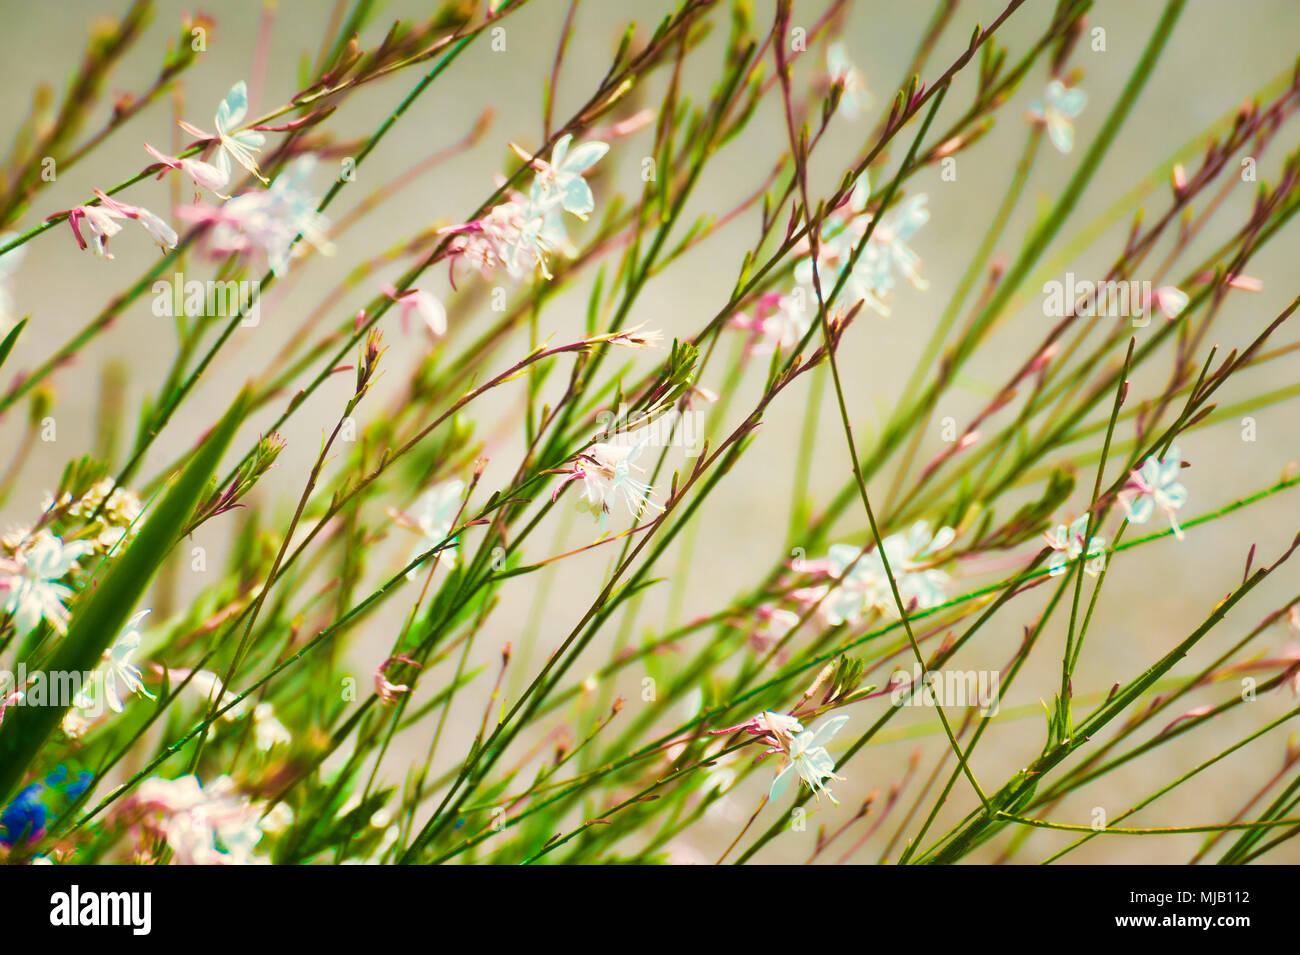 Close up of a delicate tiny white and pink flowers on a long narrow stalk. Stock Photo